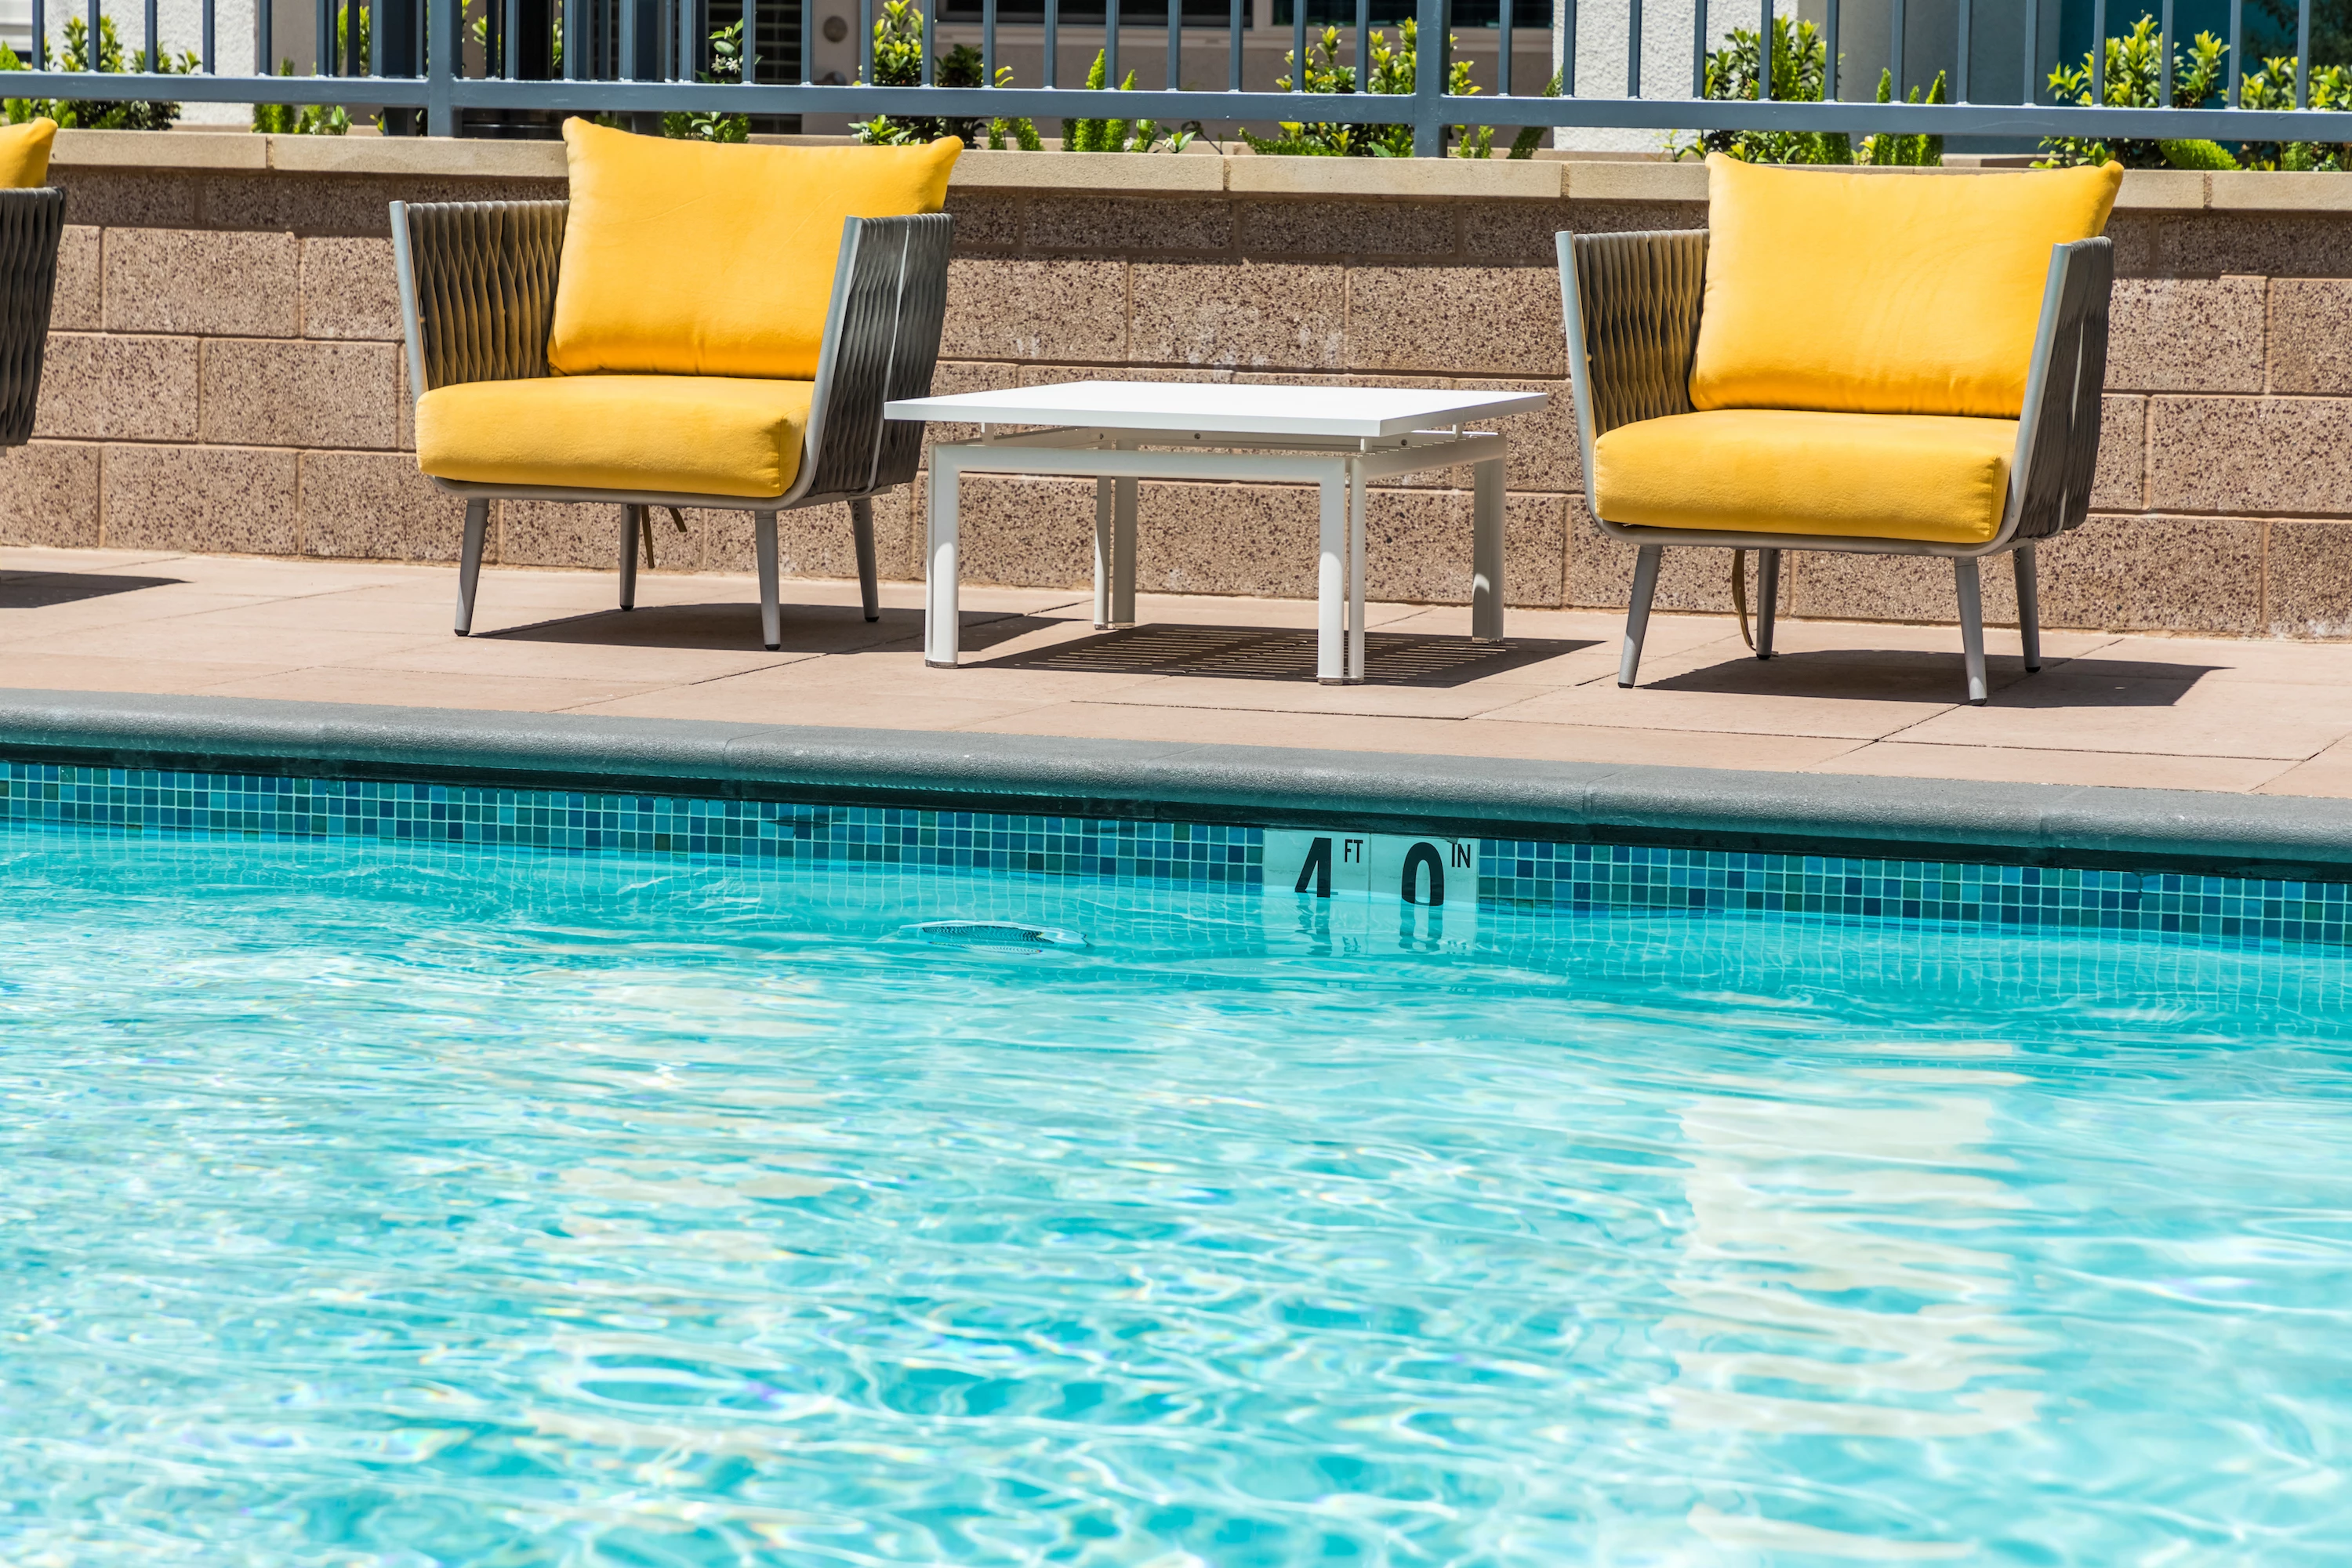 1251-16-pool-chairs-vignette-close-up-at-vela-on-ox-apartments-in-woodland-hills-ca.jpg